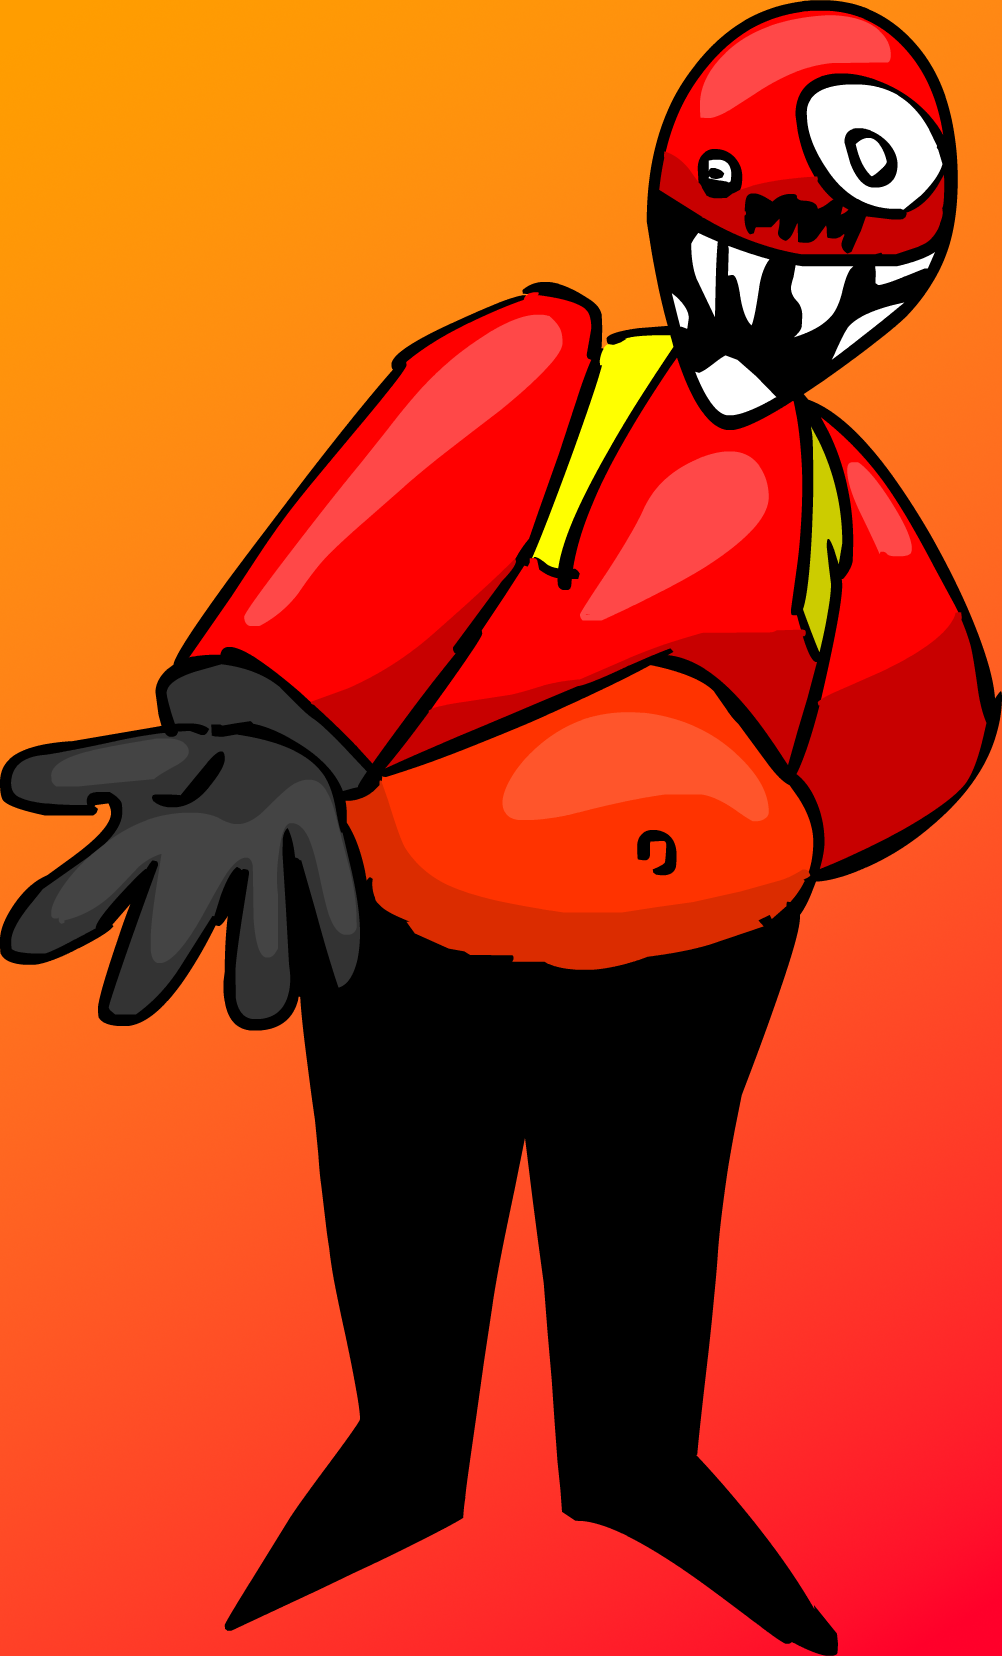 Starved Eggman by Thatsnice21 on DeviantArt